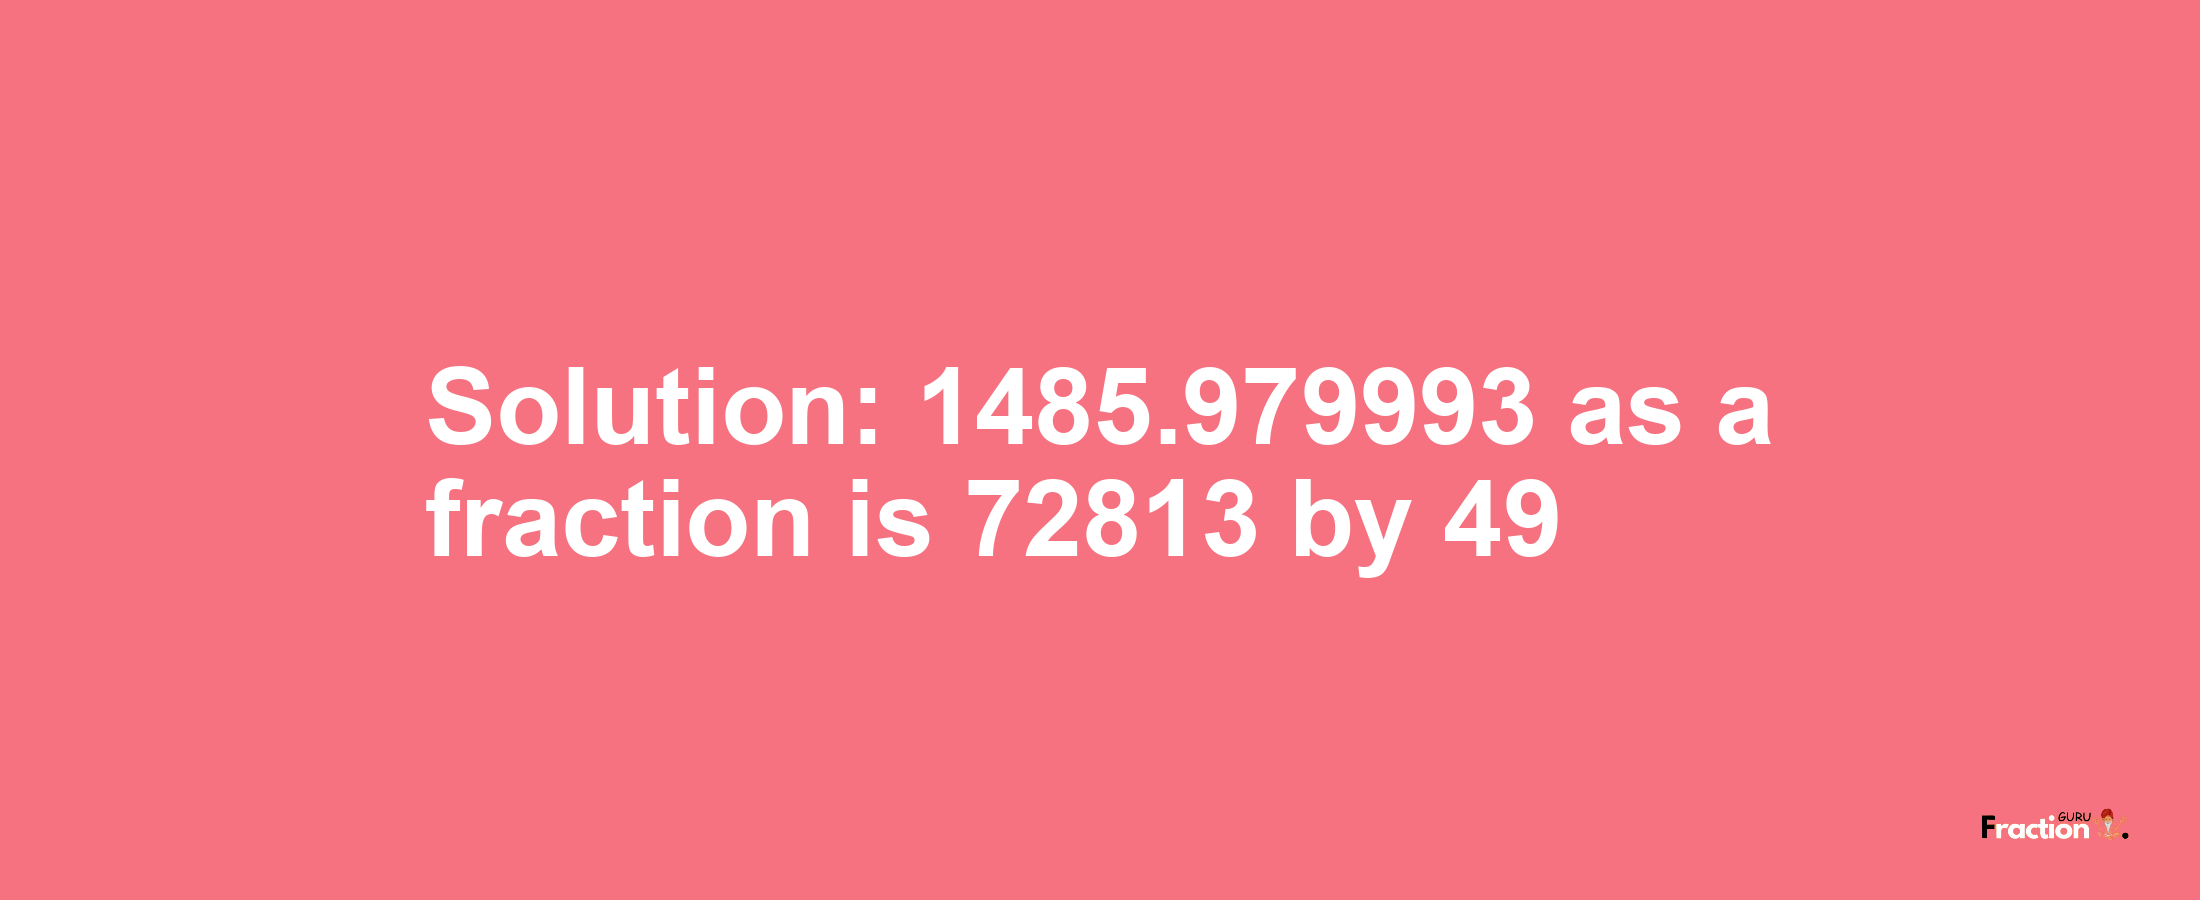 Solution:1485.979993 as a fraction is 72813/49